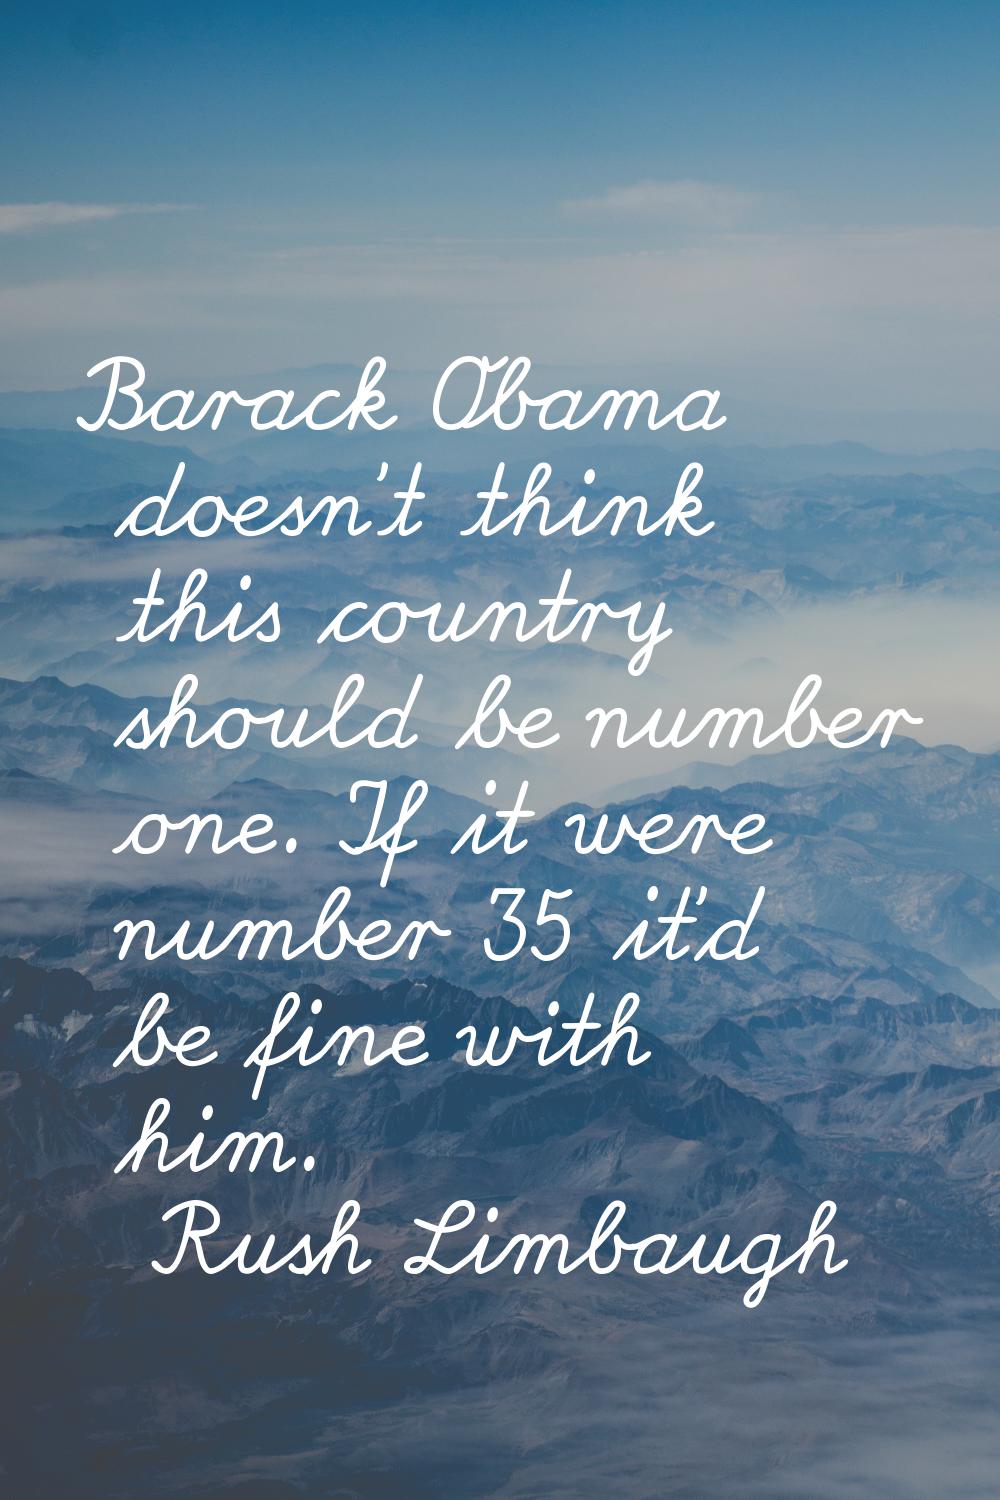 Barack Obama doesn't think this country should be number one. If it were number 35 it'd be fine wit